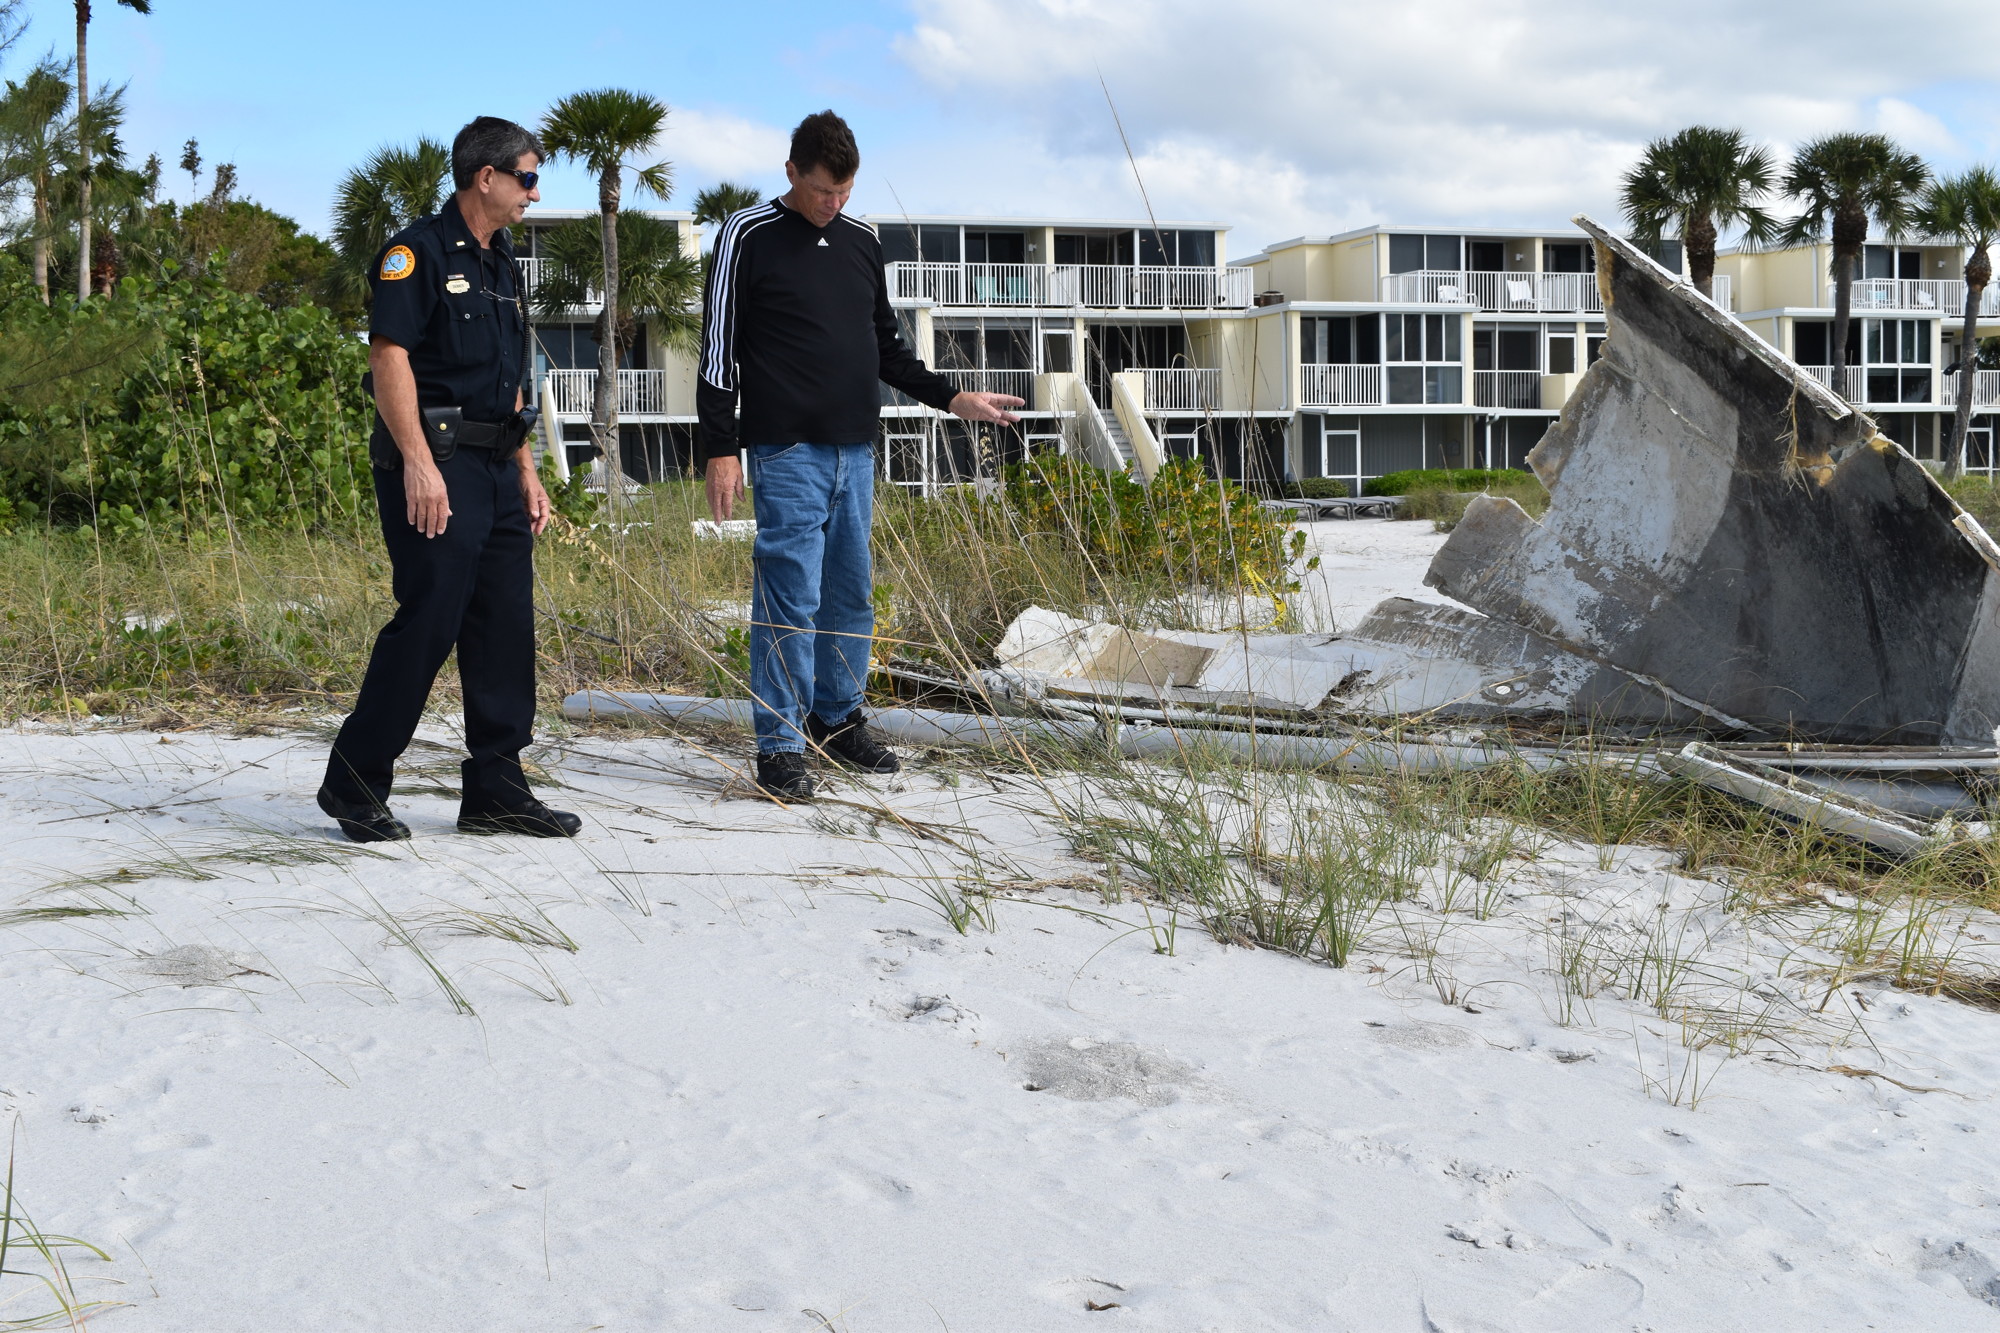 Longboat Key police officer Chris Skinner and Sea Tow owner Duke Overstreet examine the sailboat debris on Thursday afternoon in front of La Playa Rental Condominiums at 4425 Gulf of Mexico Drive.